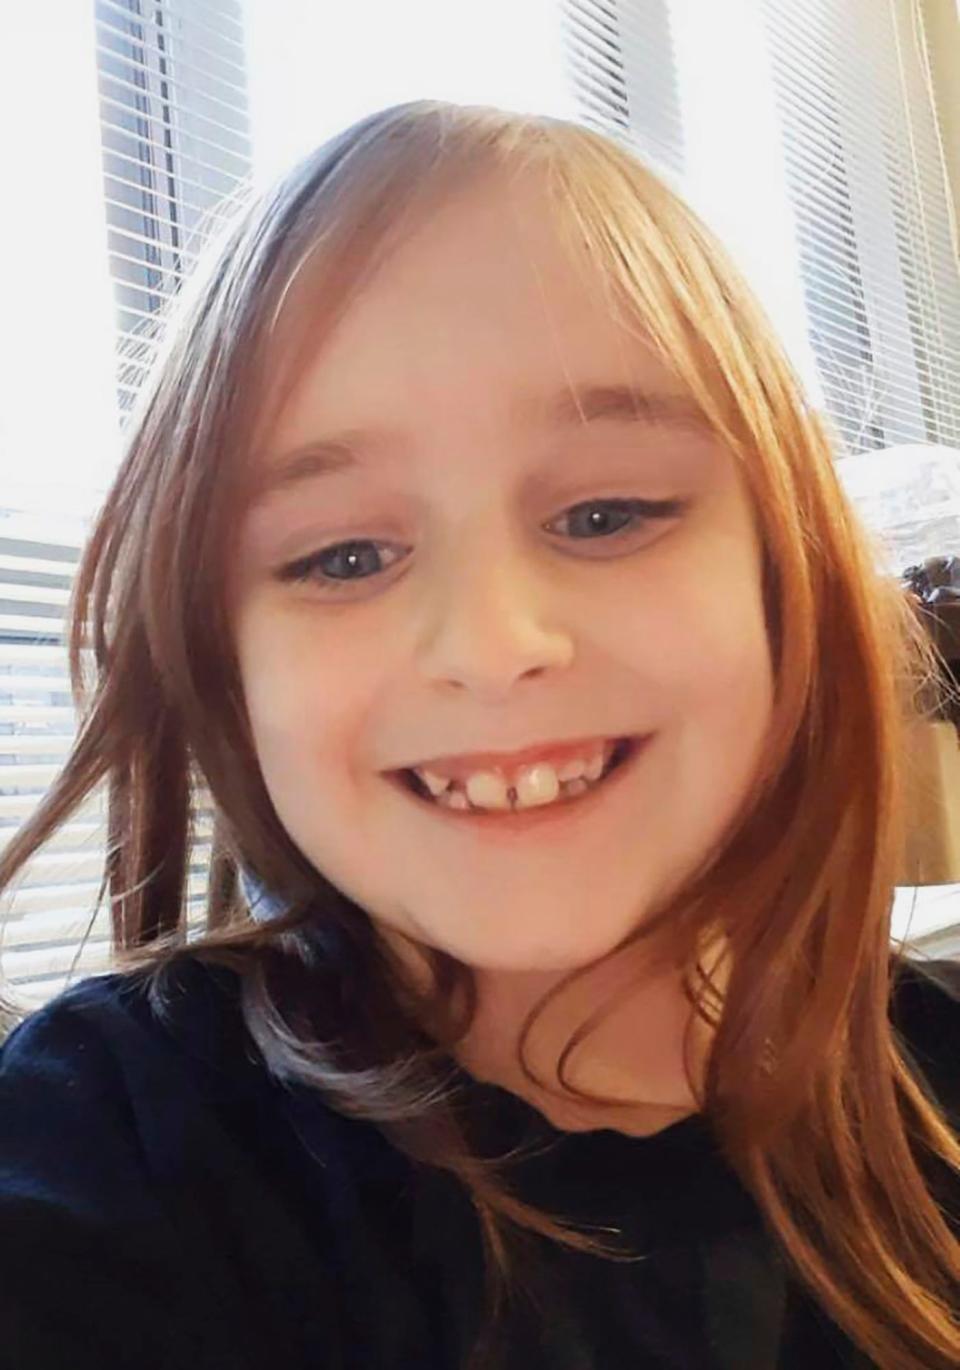 Faye Marie Swetlik, 6, disappeared after getting off a school bus near her home in South Carolina.